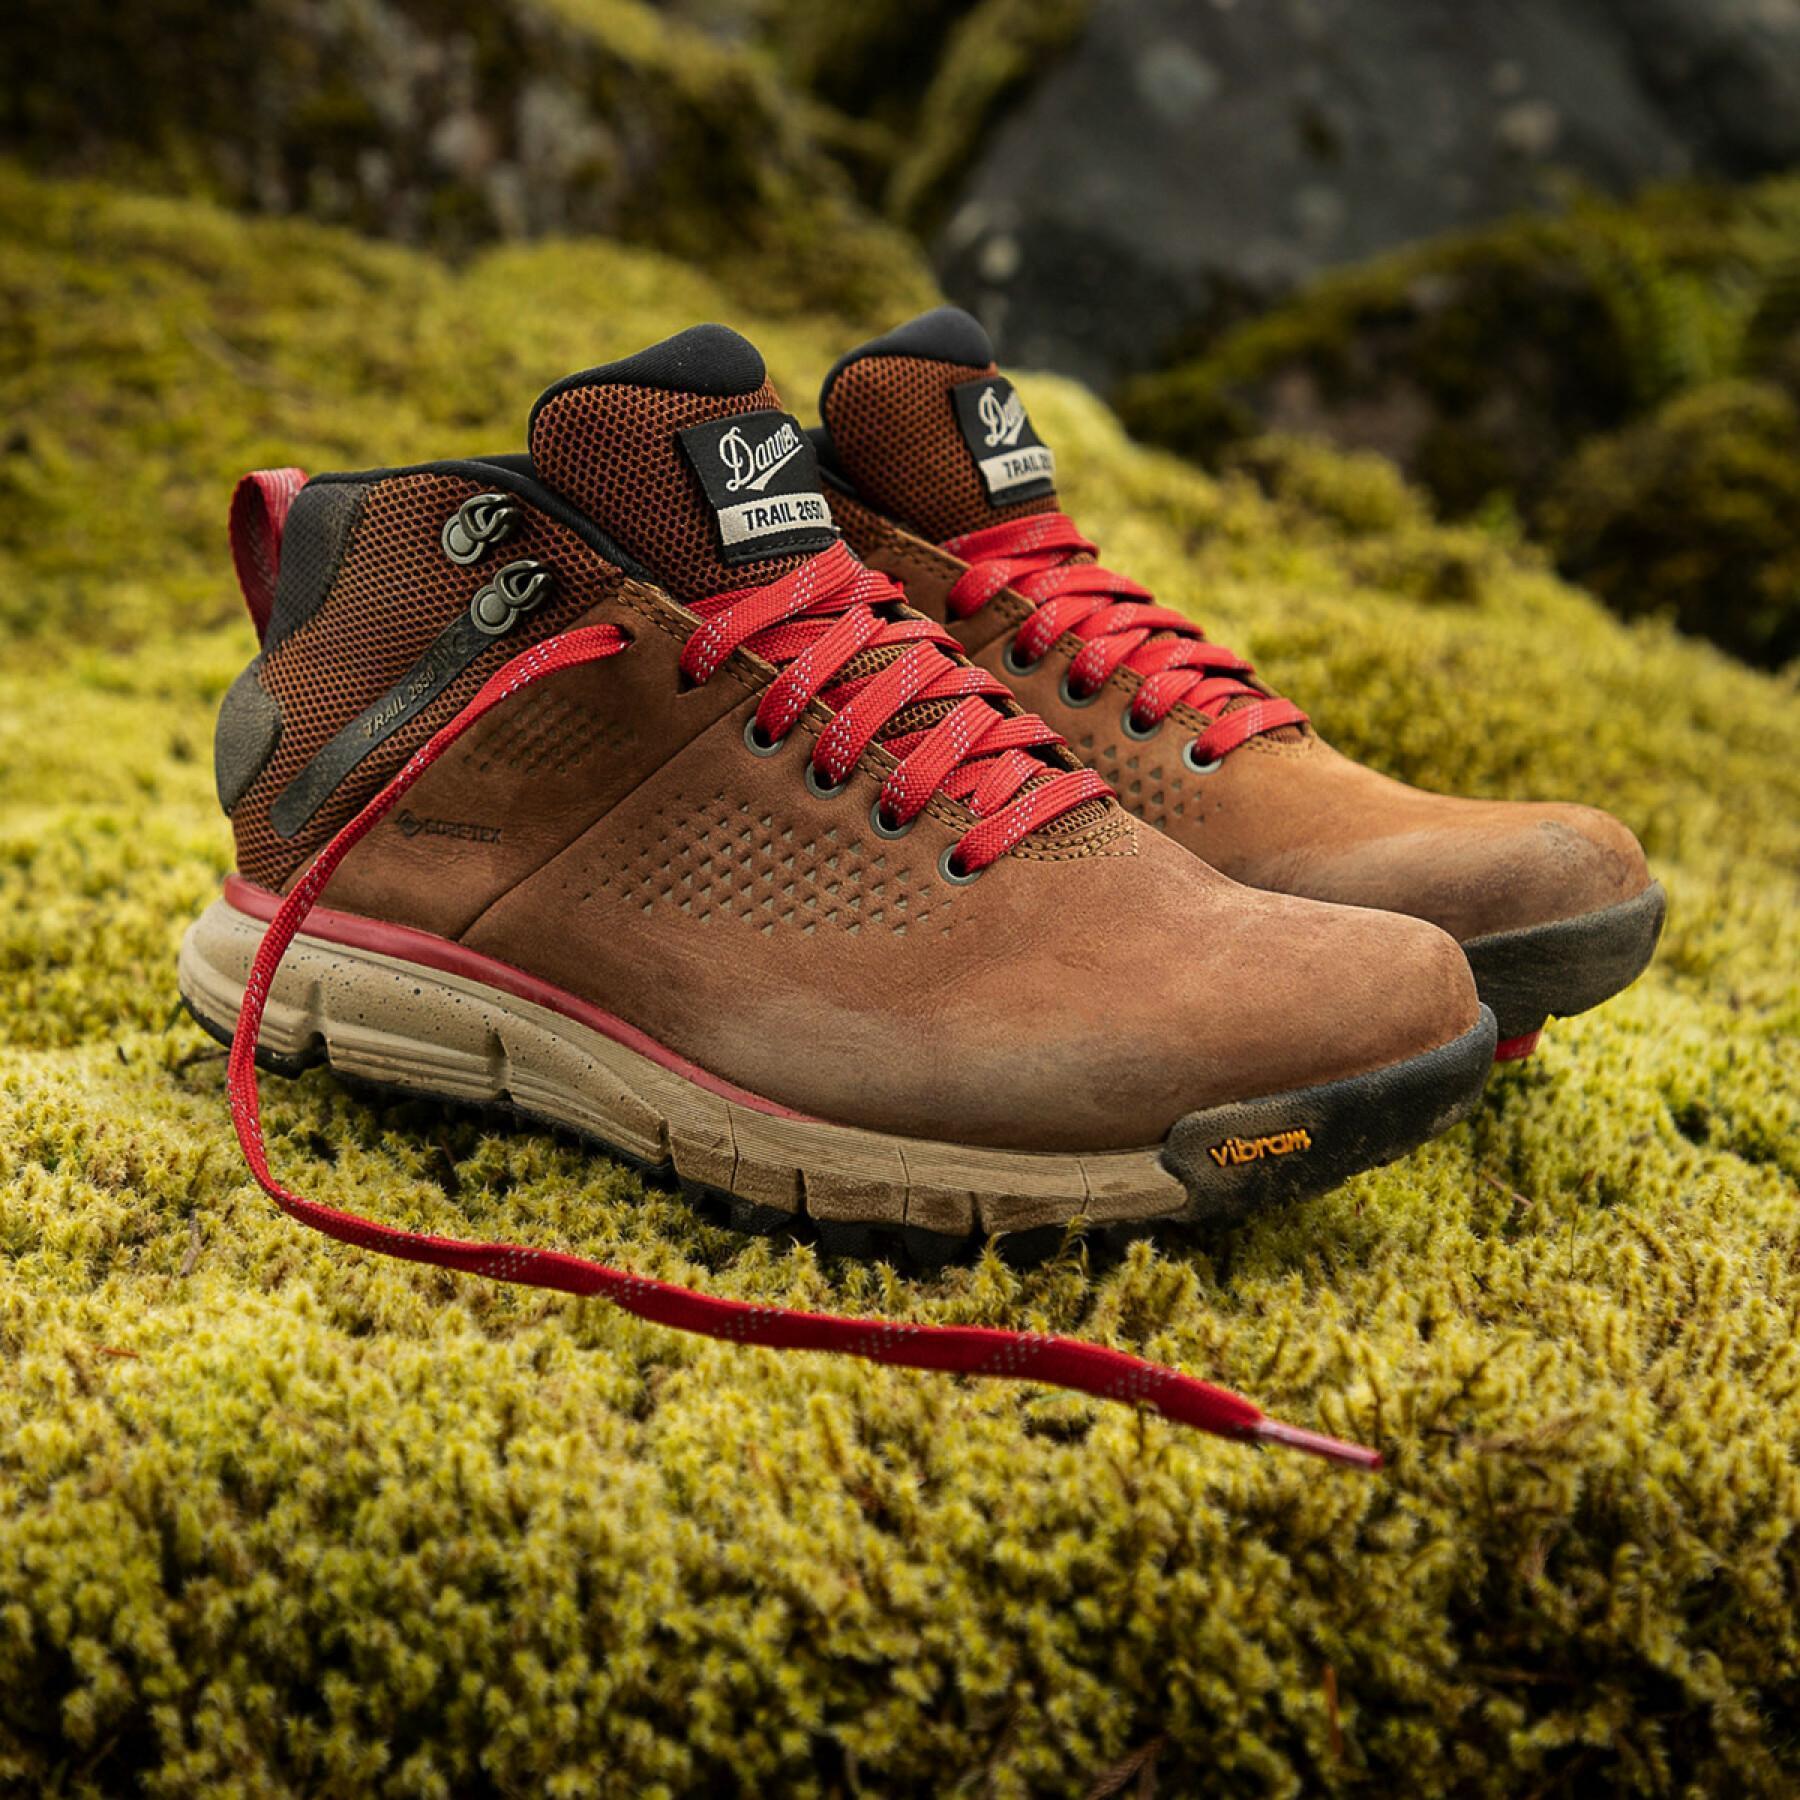 Hiking shoes Danner 2650 GTX Mid 4